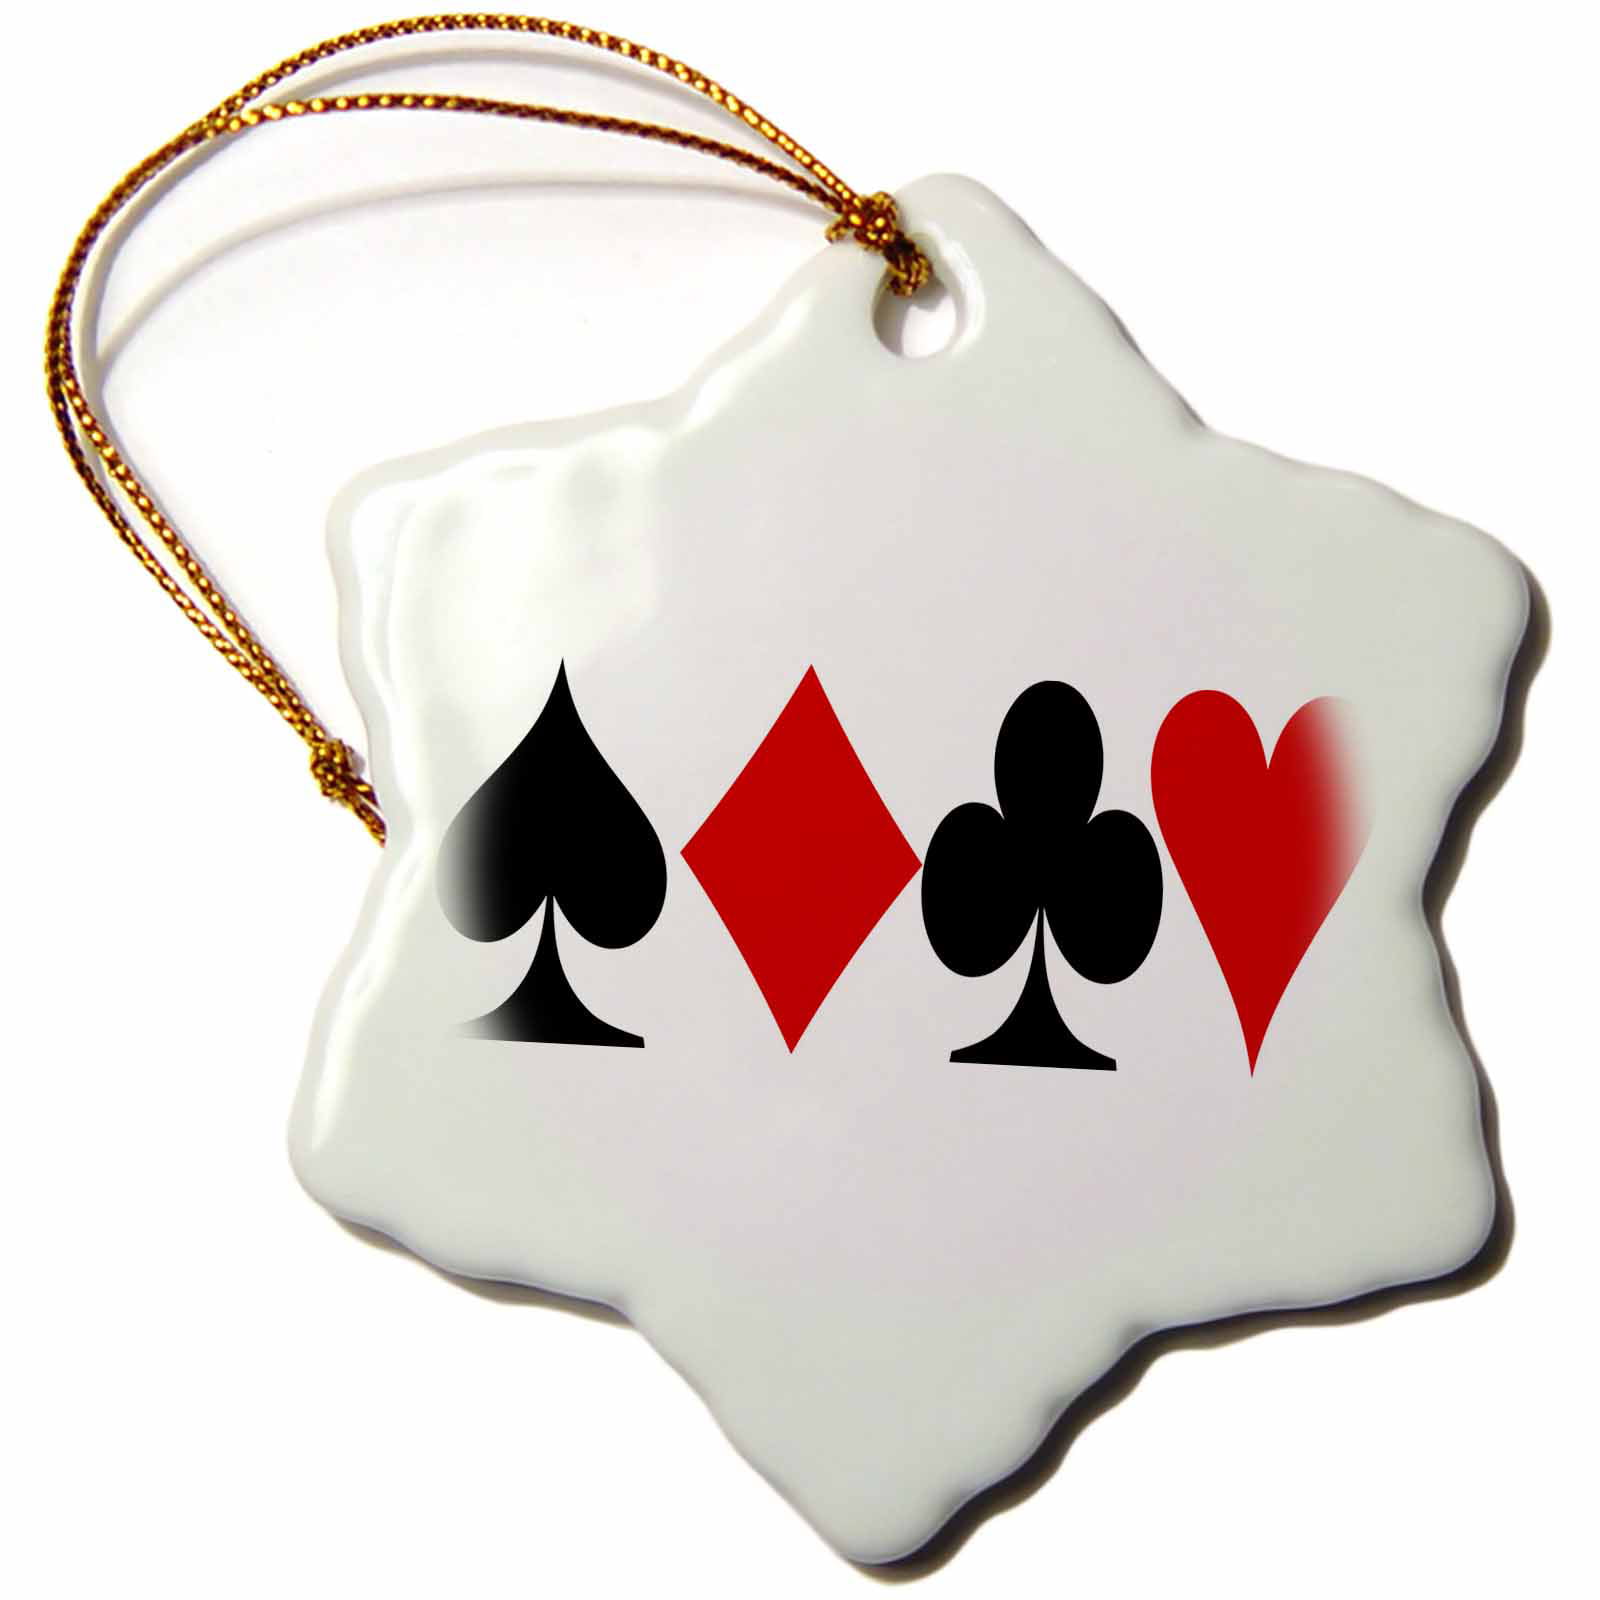 Christmas Gifts Playing Cards Heart Diamond Club Spade Pop Xmas Porcelain Decor Snowflake Ornament Home Decorations Hanging Crafts 